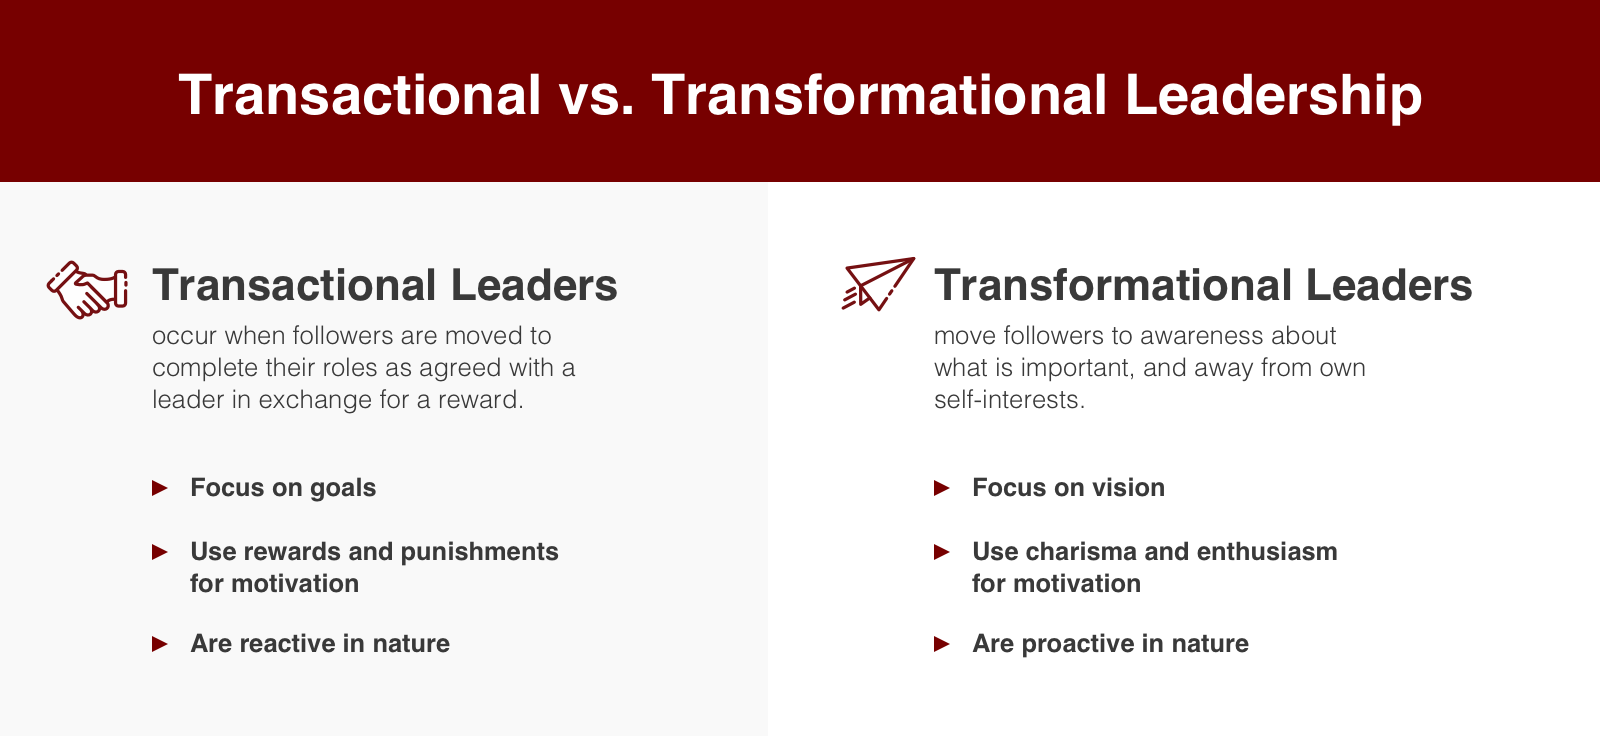 An infographic comparing transactional and transformational leadership.